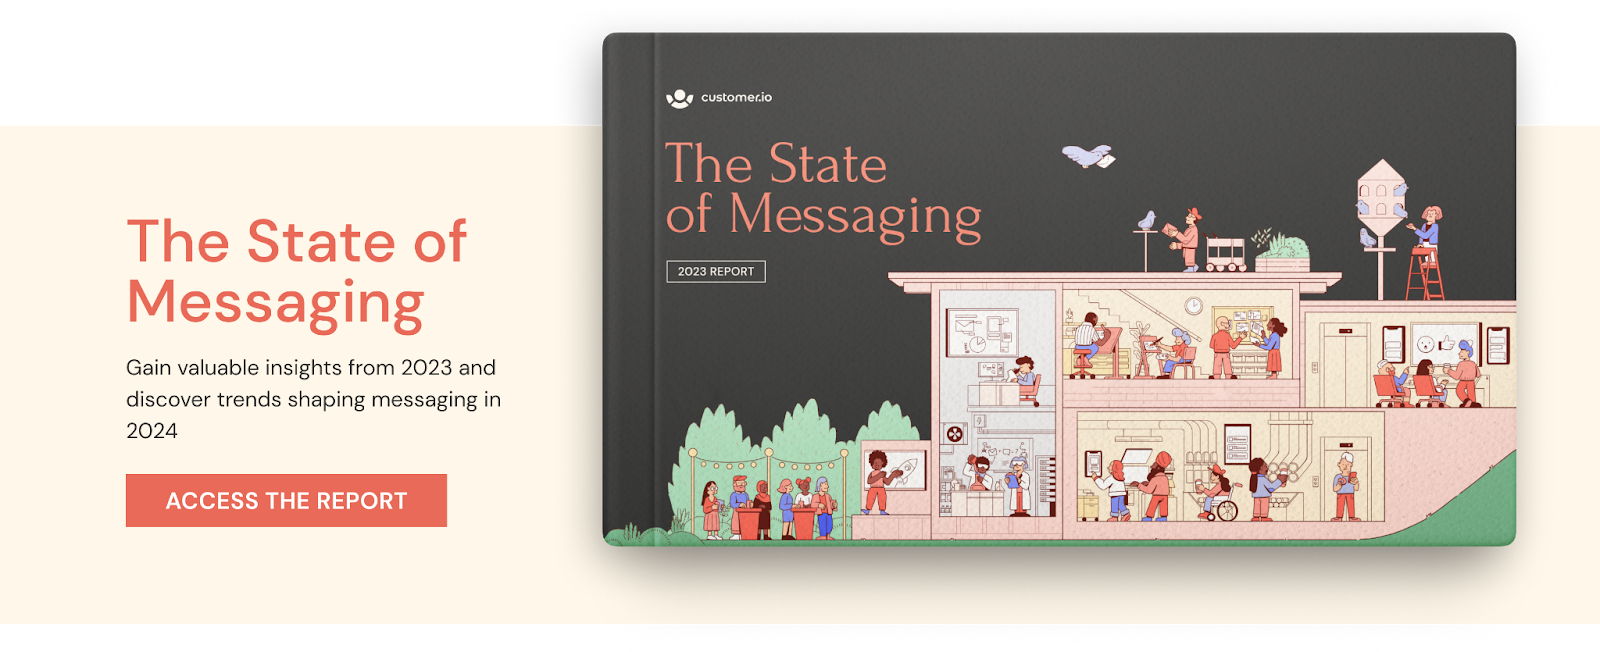 The State of Messaging Report 2023